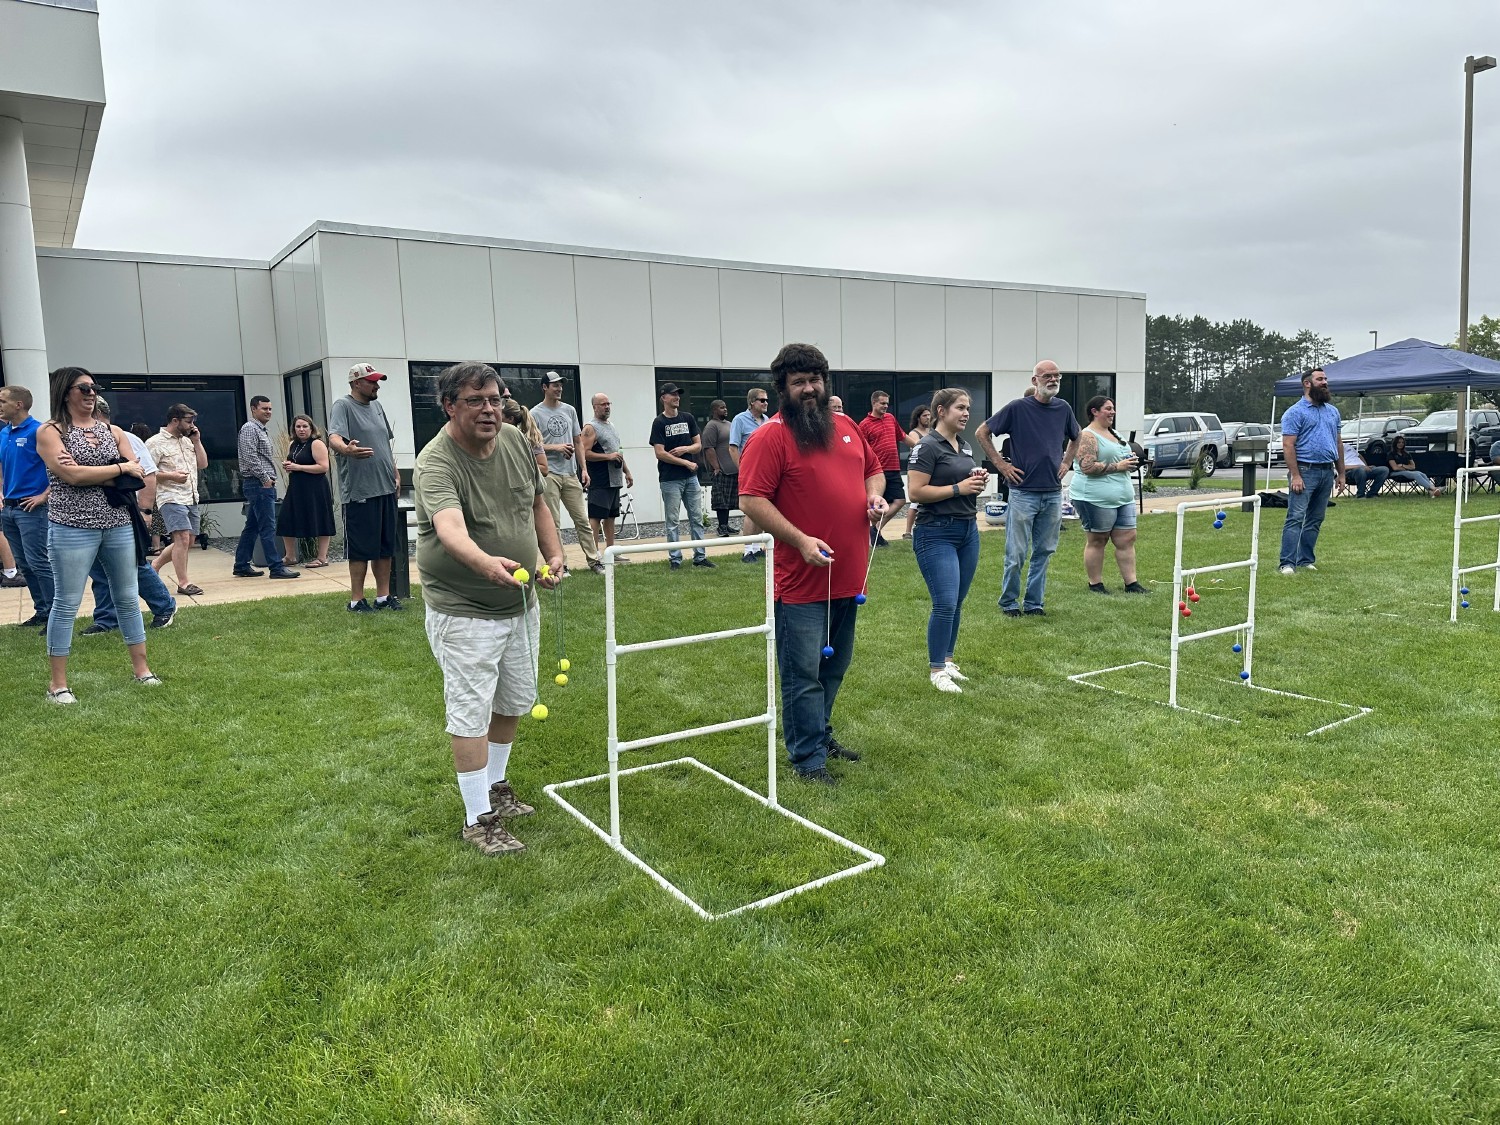 Team members participated in ladder golf at our annual Joyful Growth cook out!